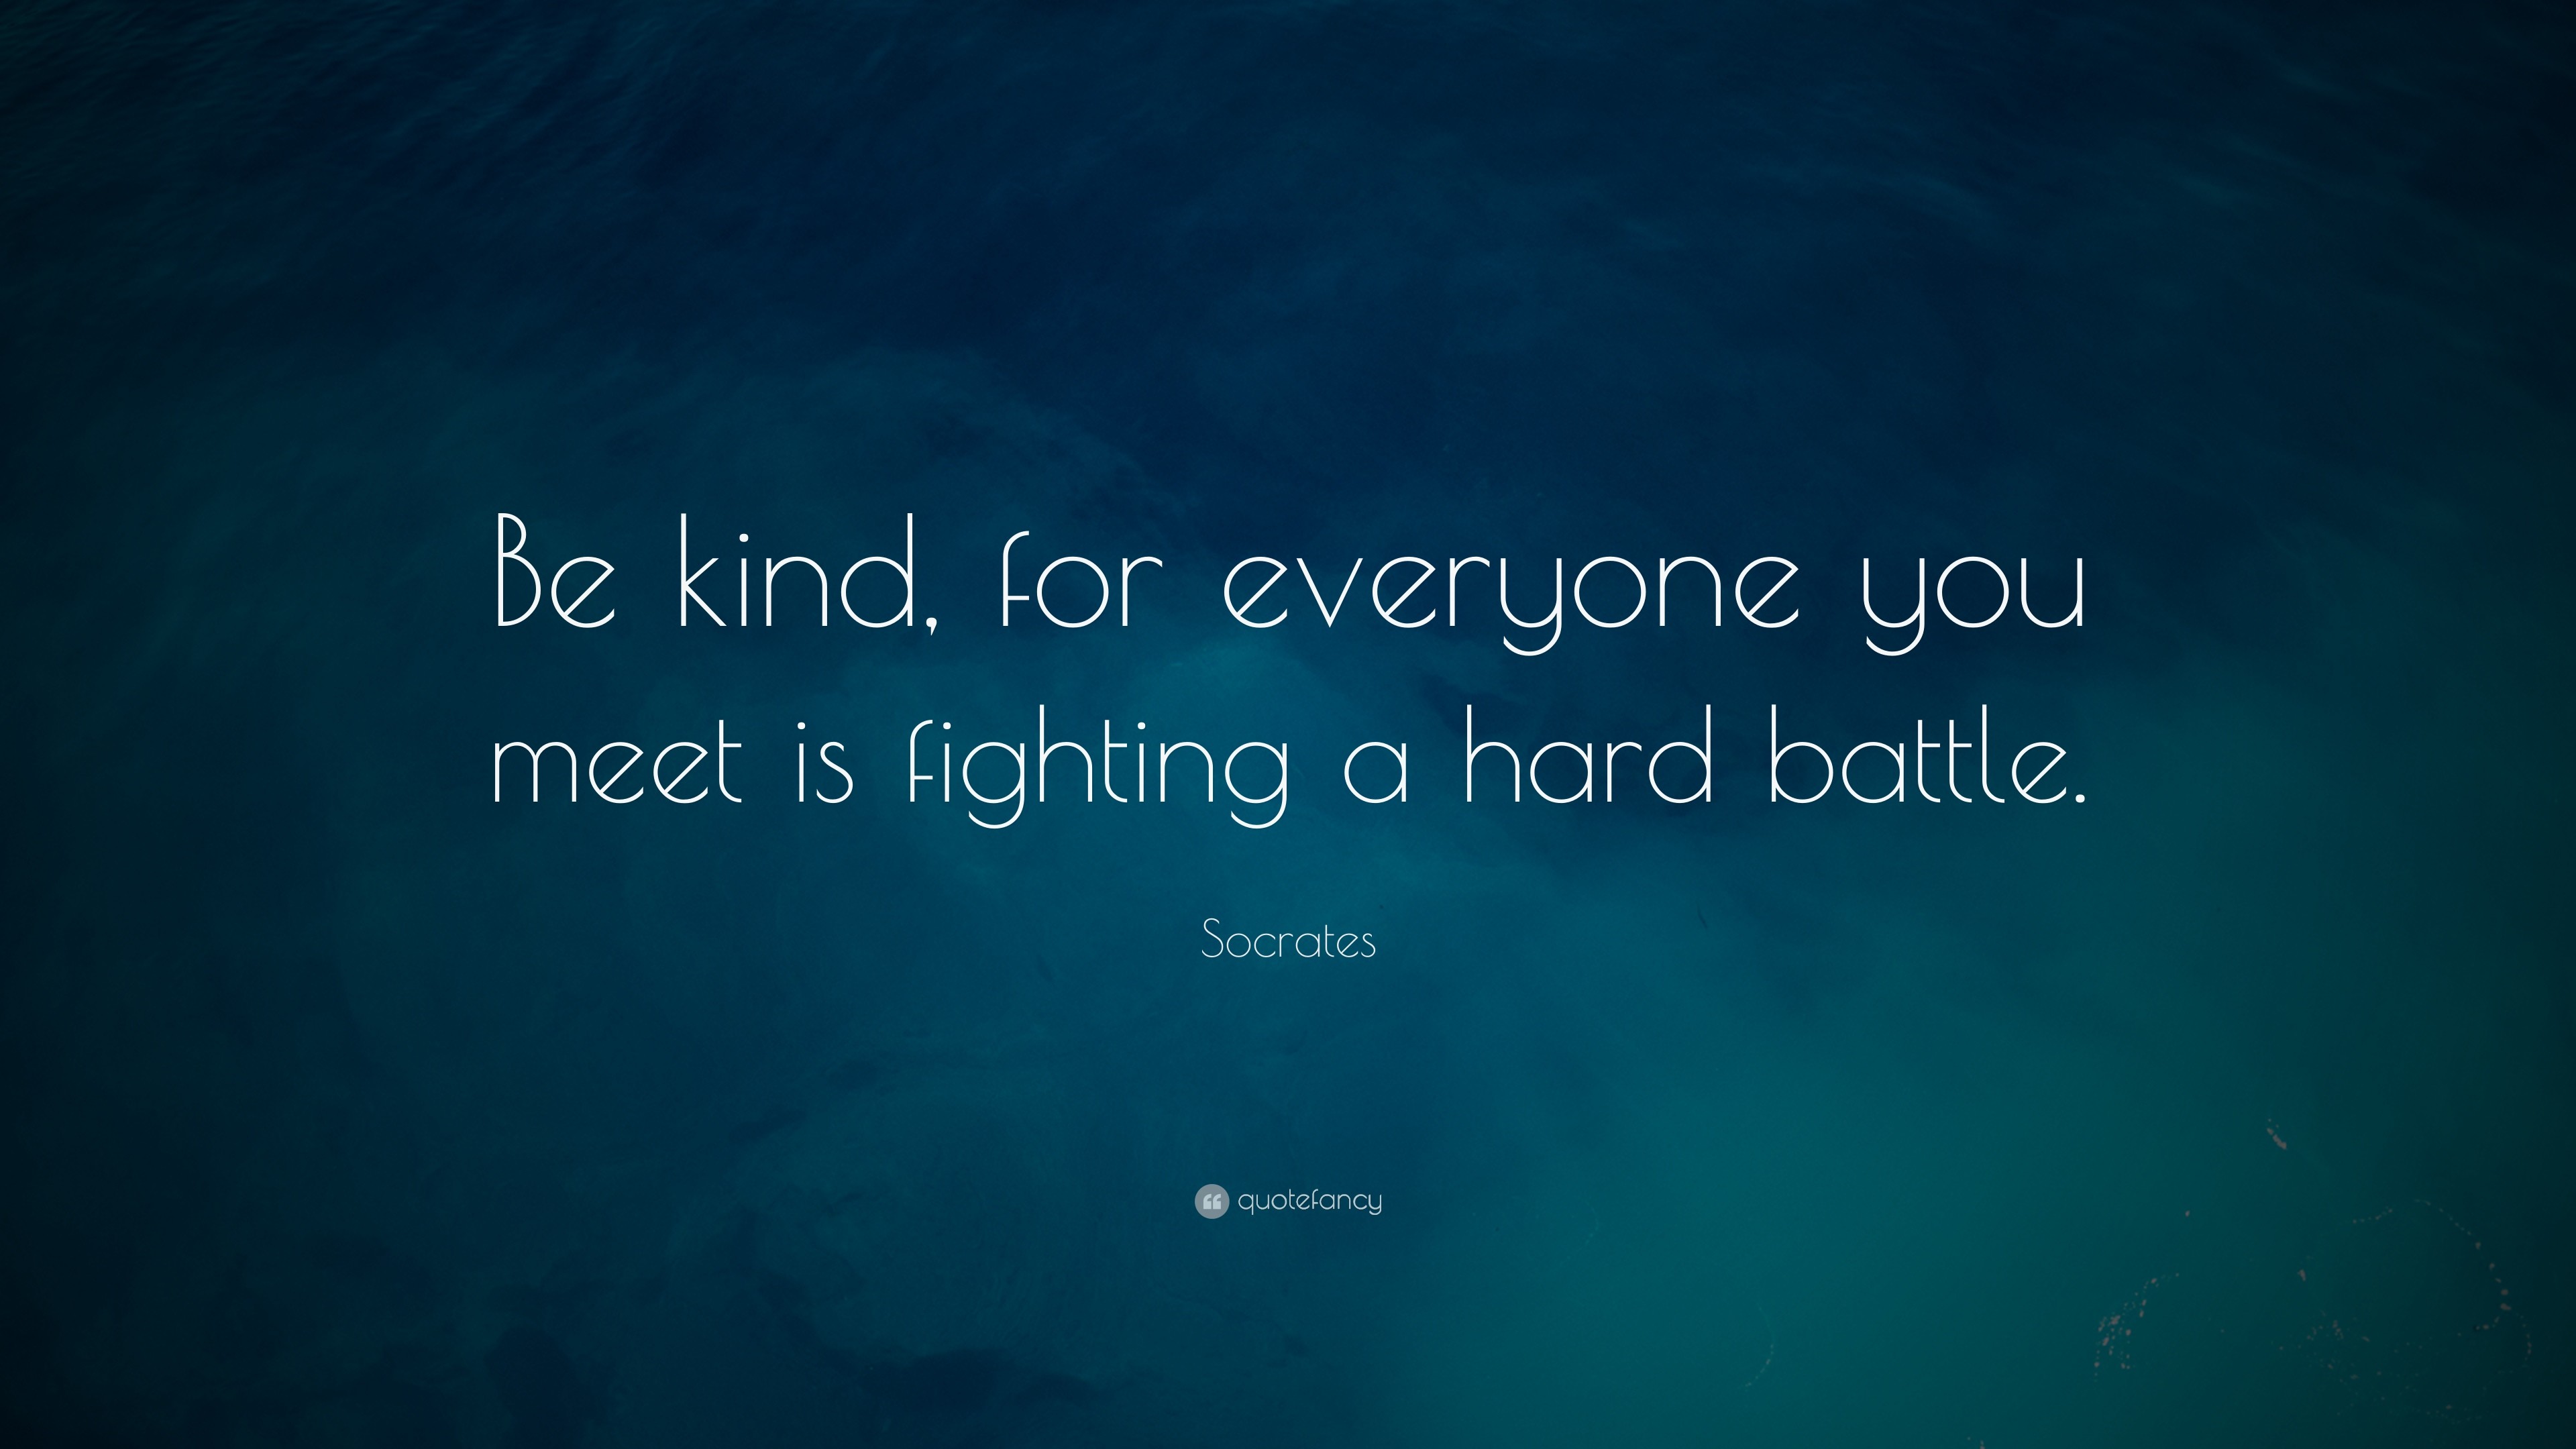 3840x2160 Socrates Quote: “Be kind, for everyone you meet is fighting a hard battle